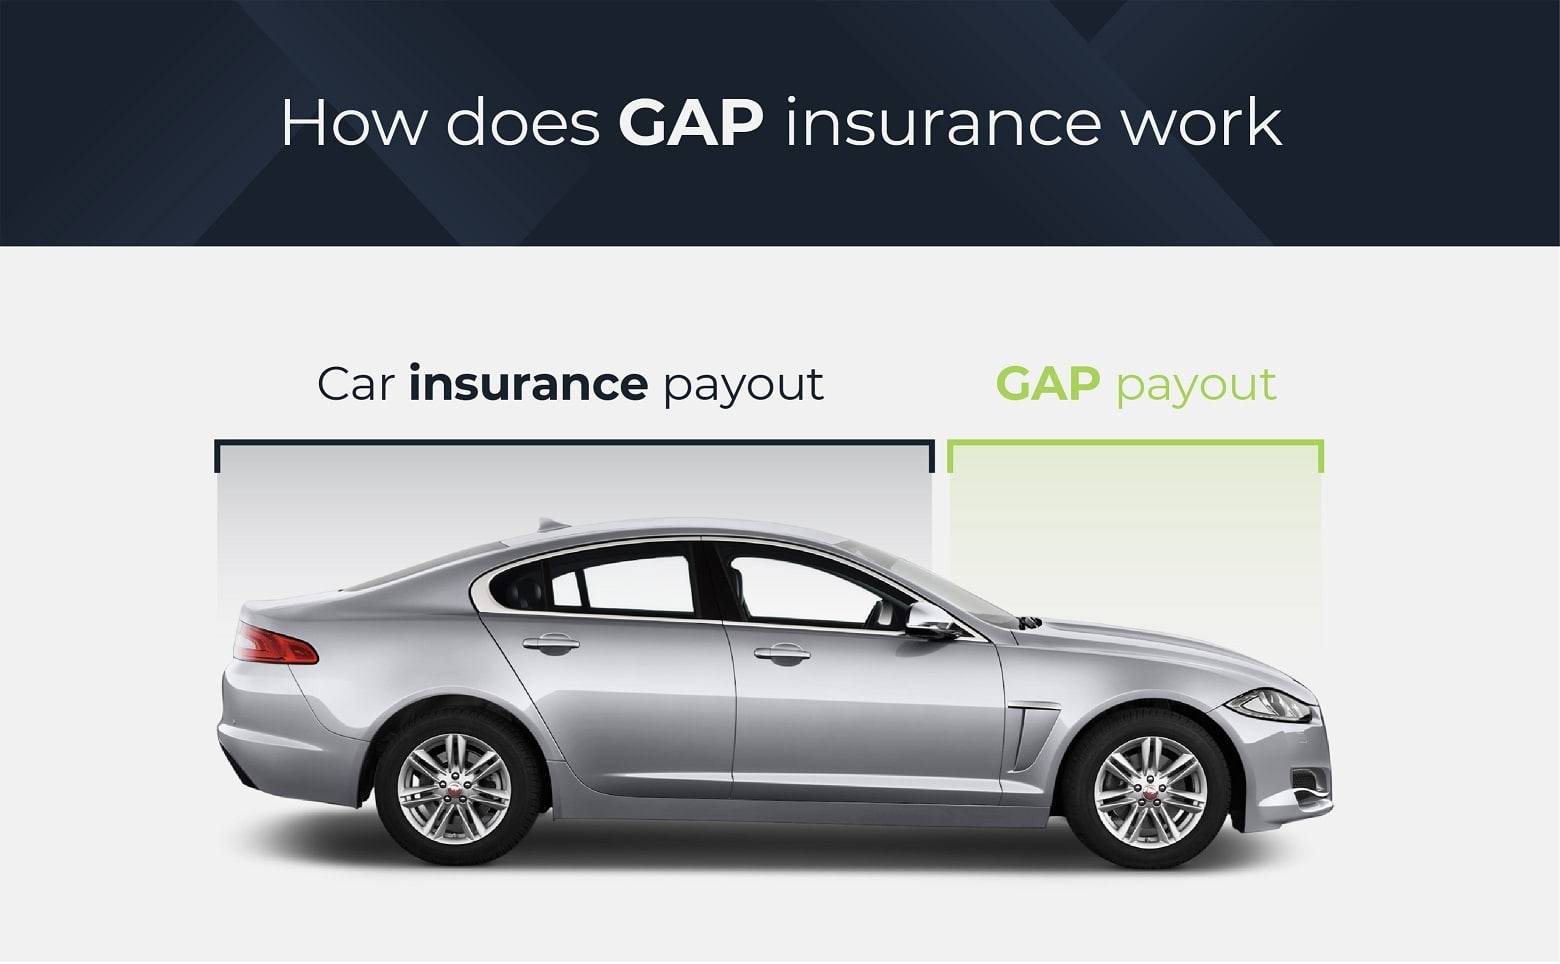 How Do I Know If I Have Gap Insurance On My Car?